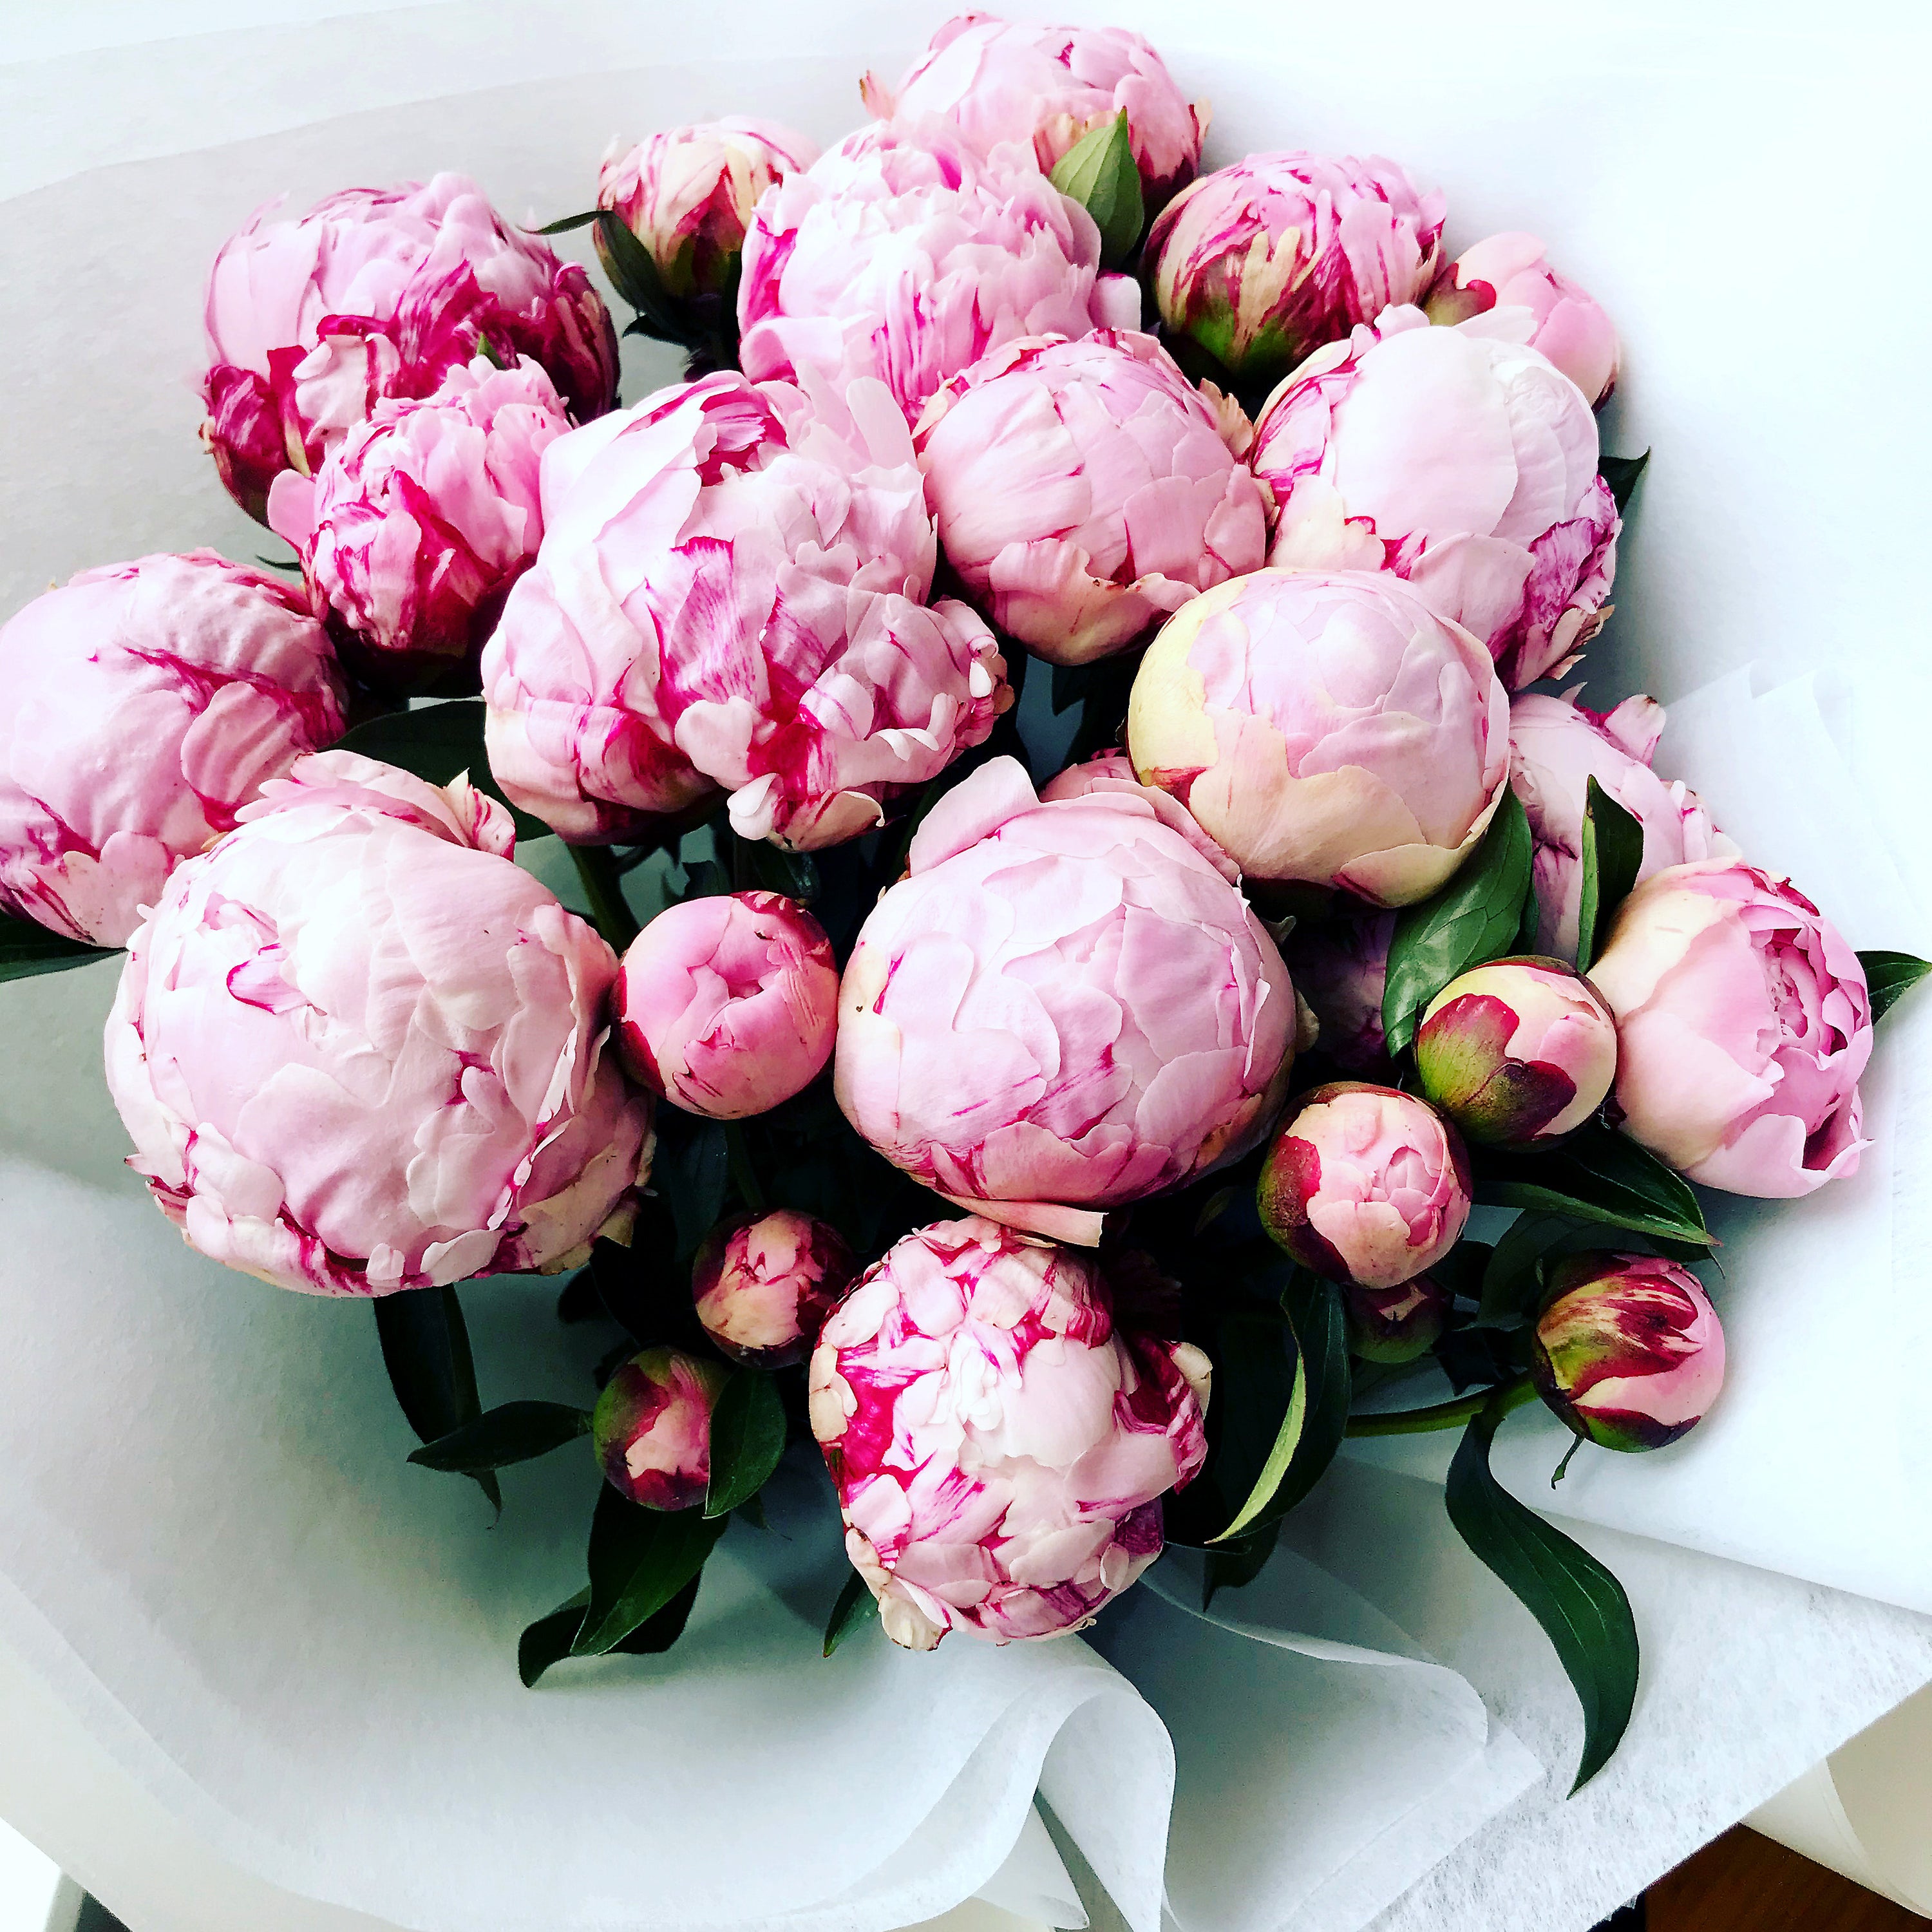 A close up of a bouquet of Pink Peonies wrapped in white paper